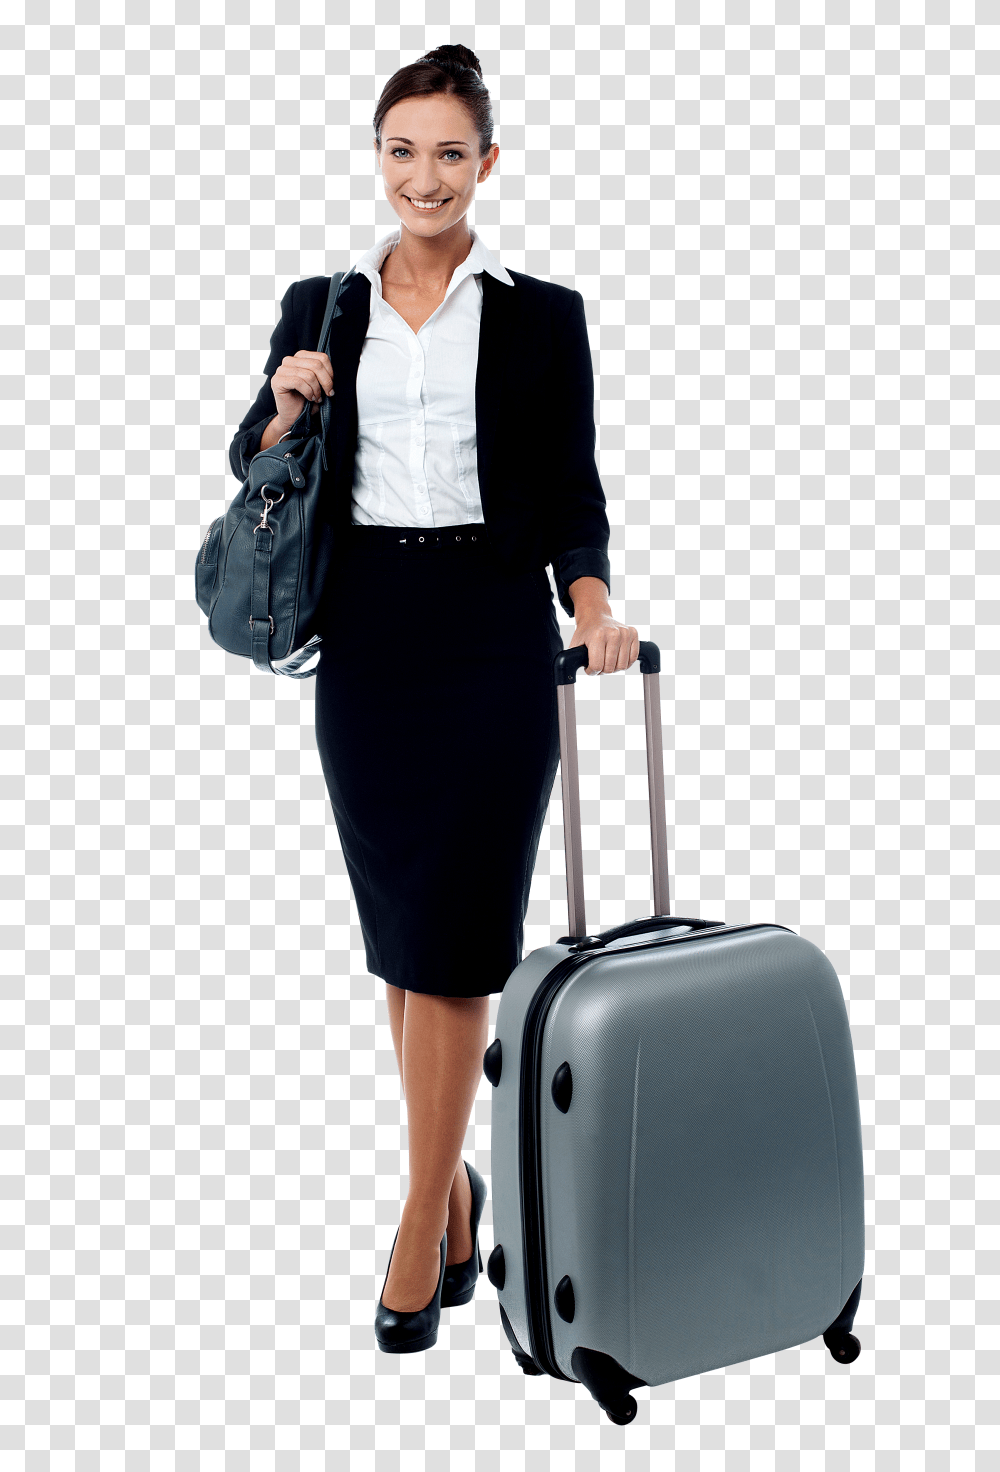 Women In Suit Royalty Free Image Play Transparent Png